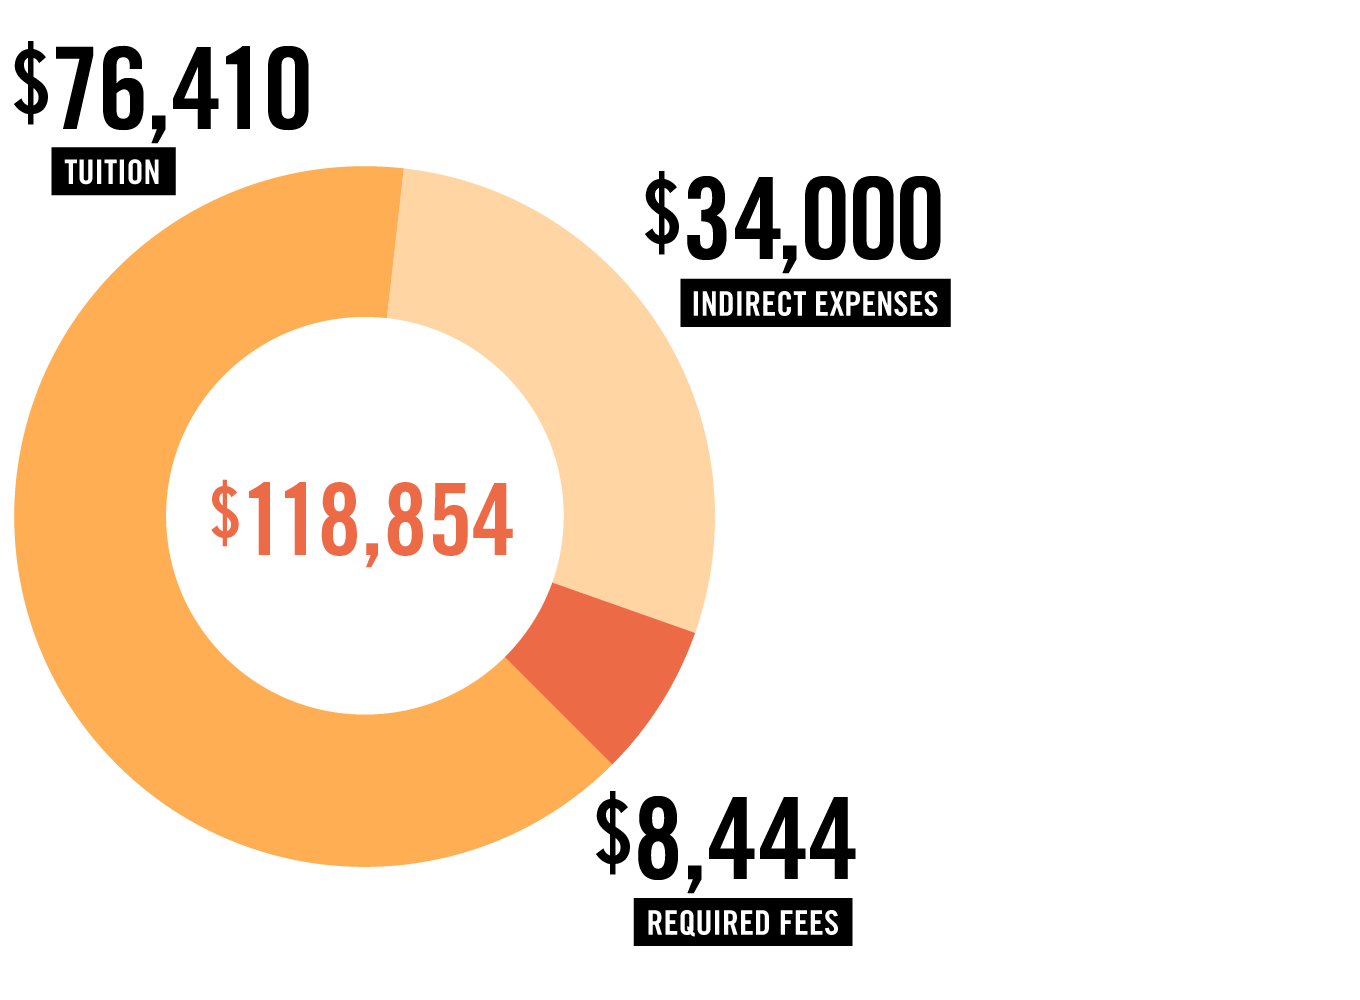 The annual cost of the Harvard MBA program in a pie chart with the total of $118,854. Largest segment of $76,410 for tuition, $34,000 for indirect expenses, and $8,444 for required fees.